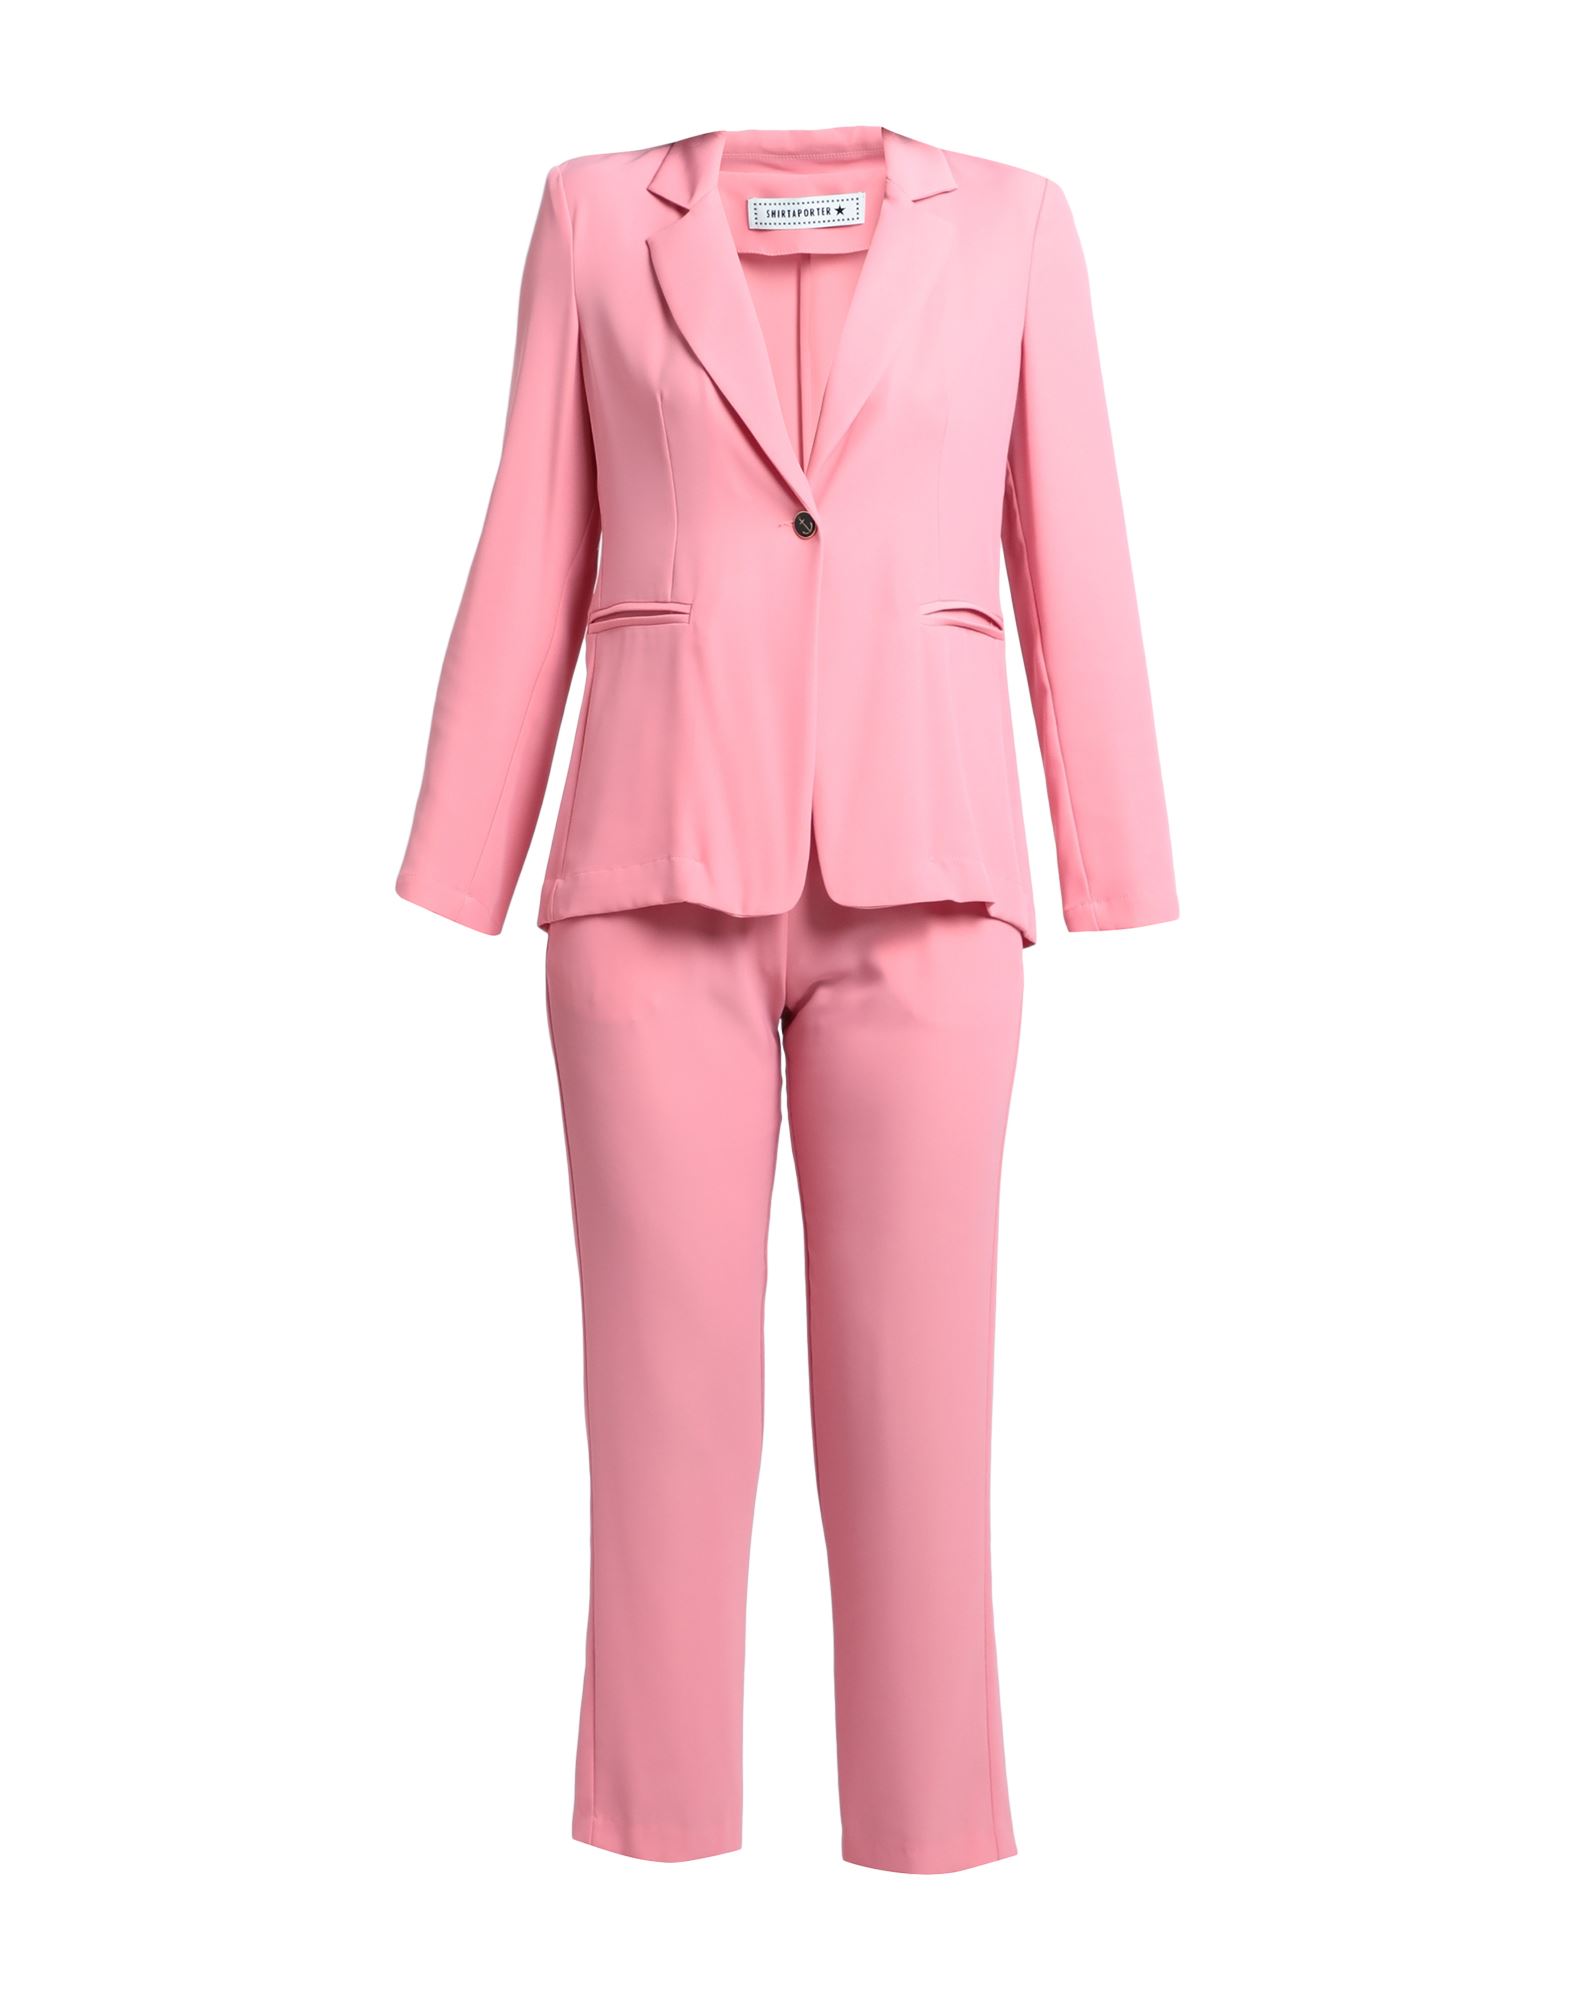 Shirtaporter Suits In Pink